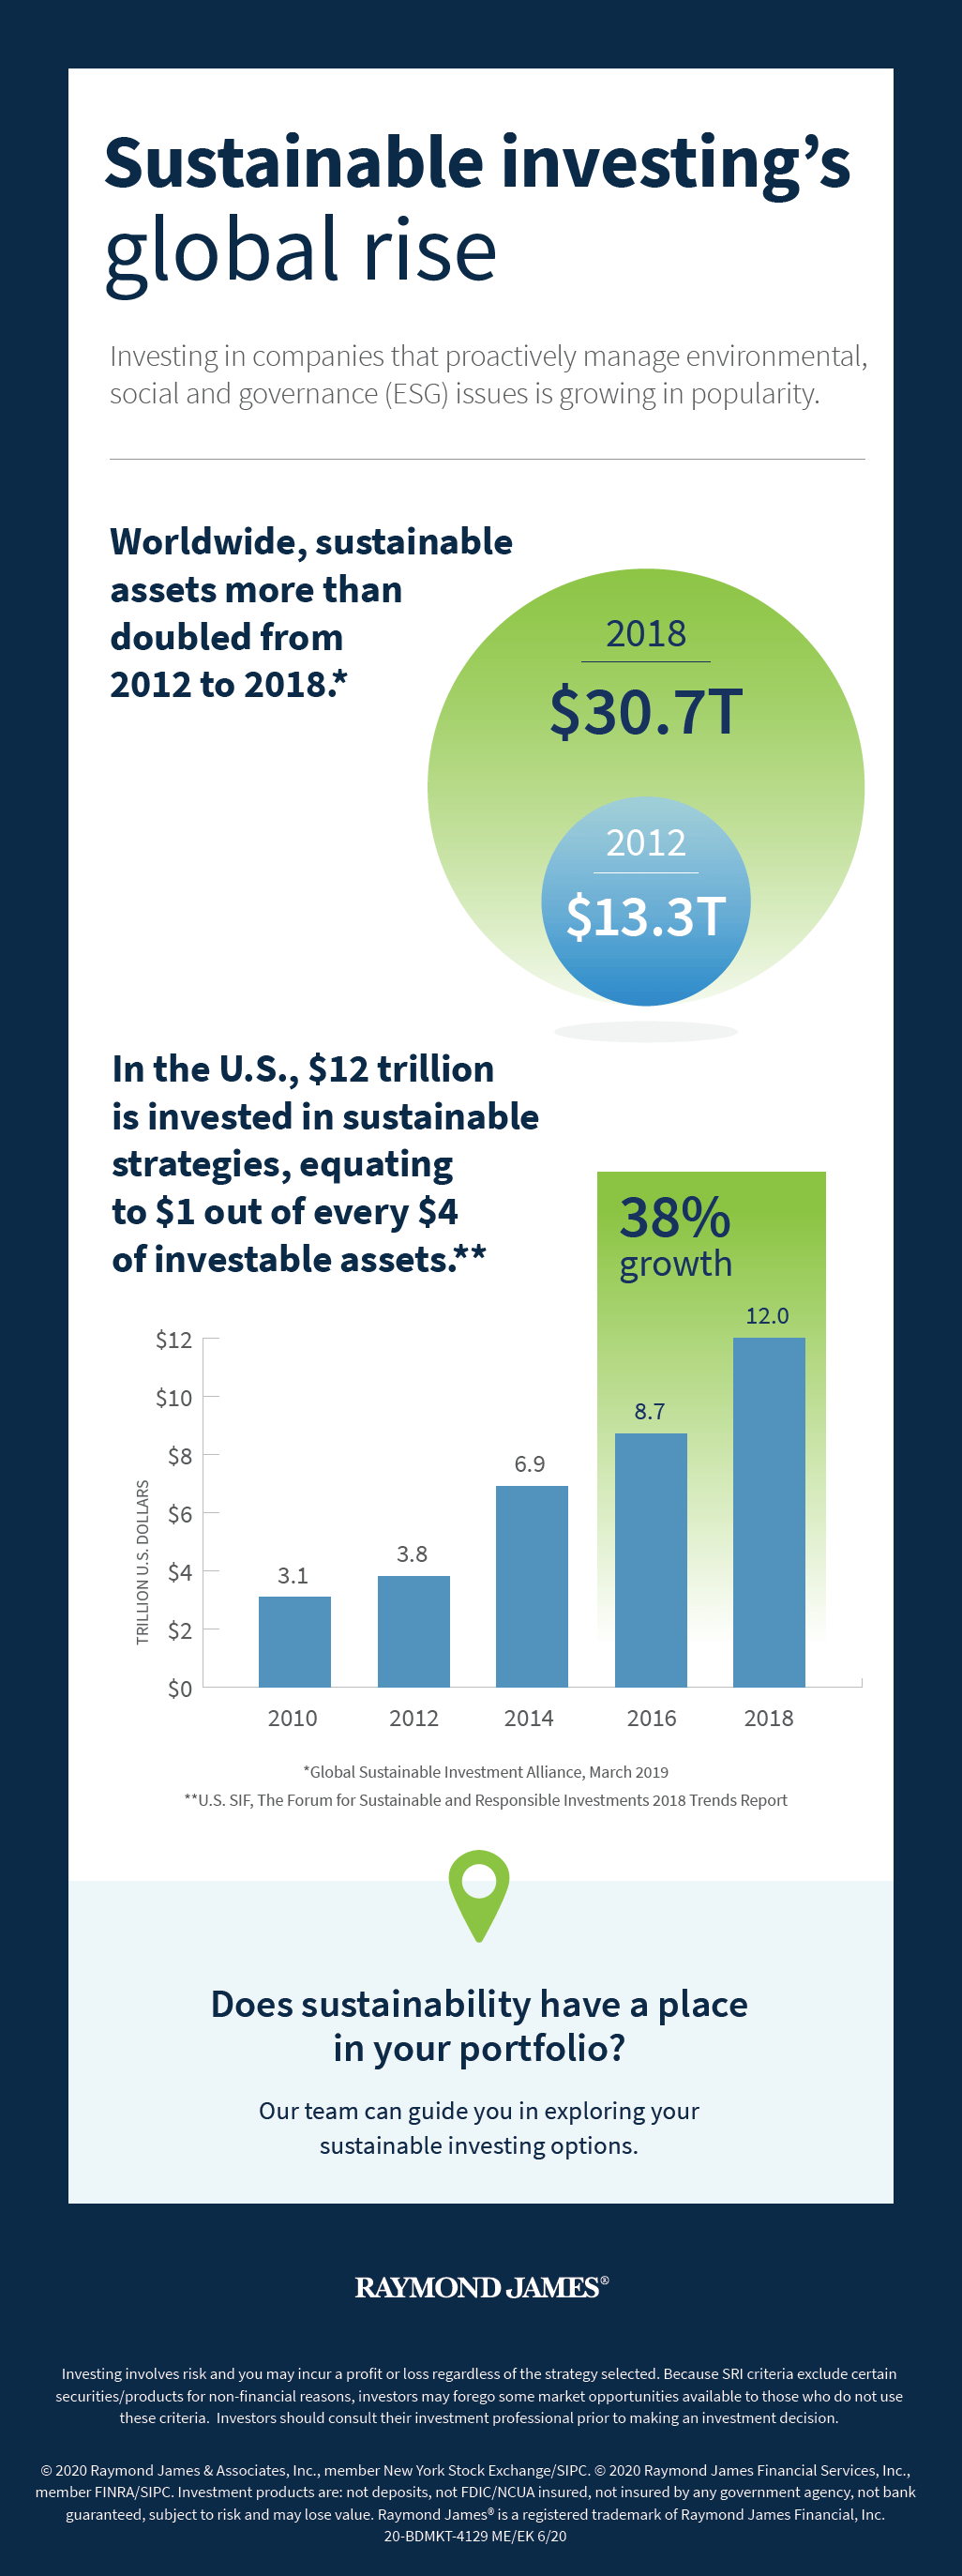 Sustainable investing's global rise